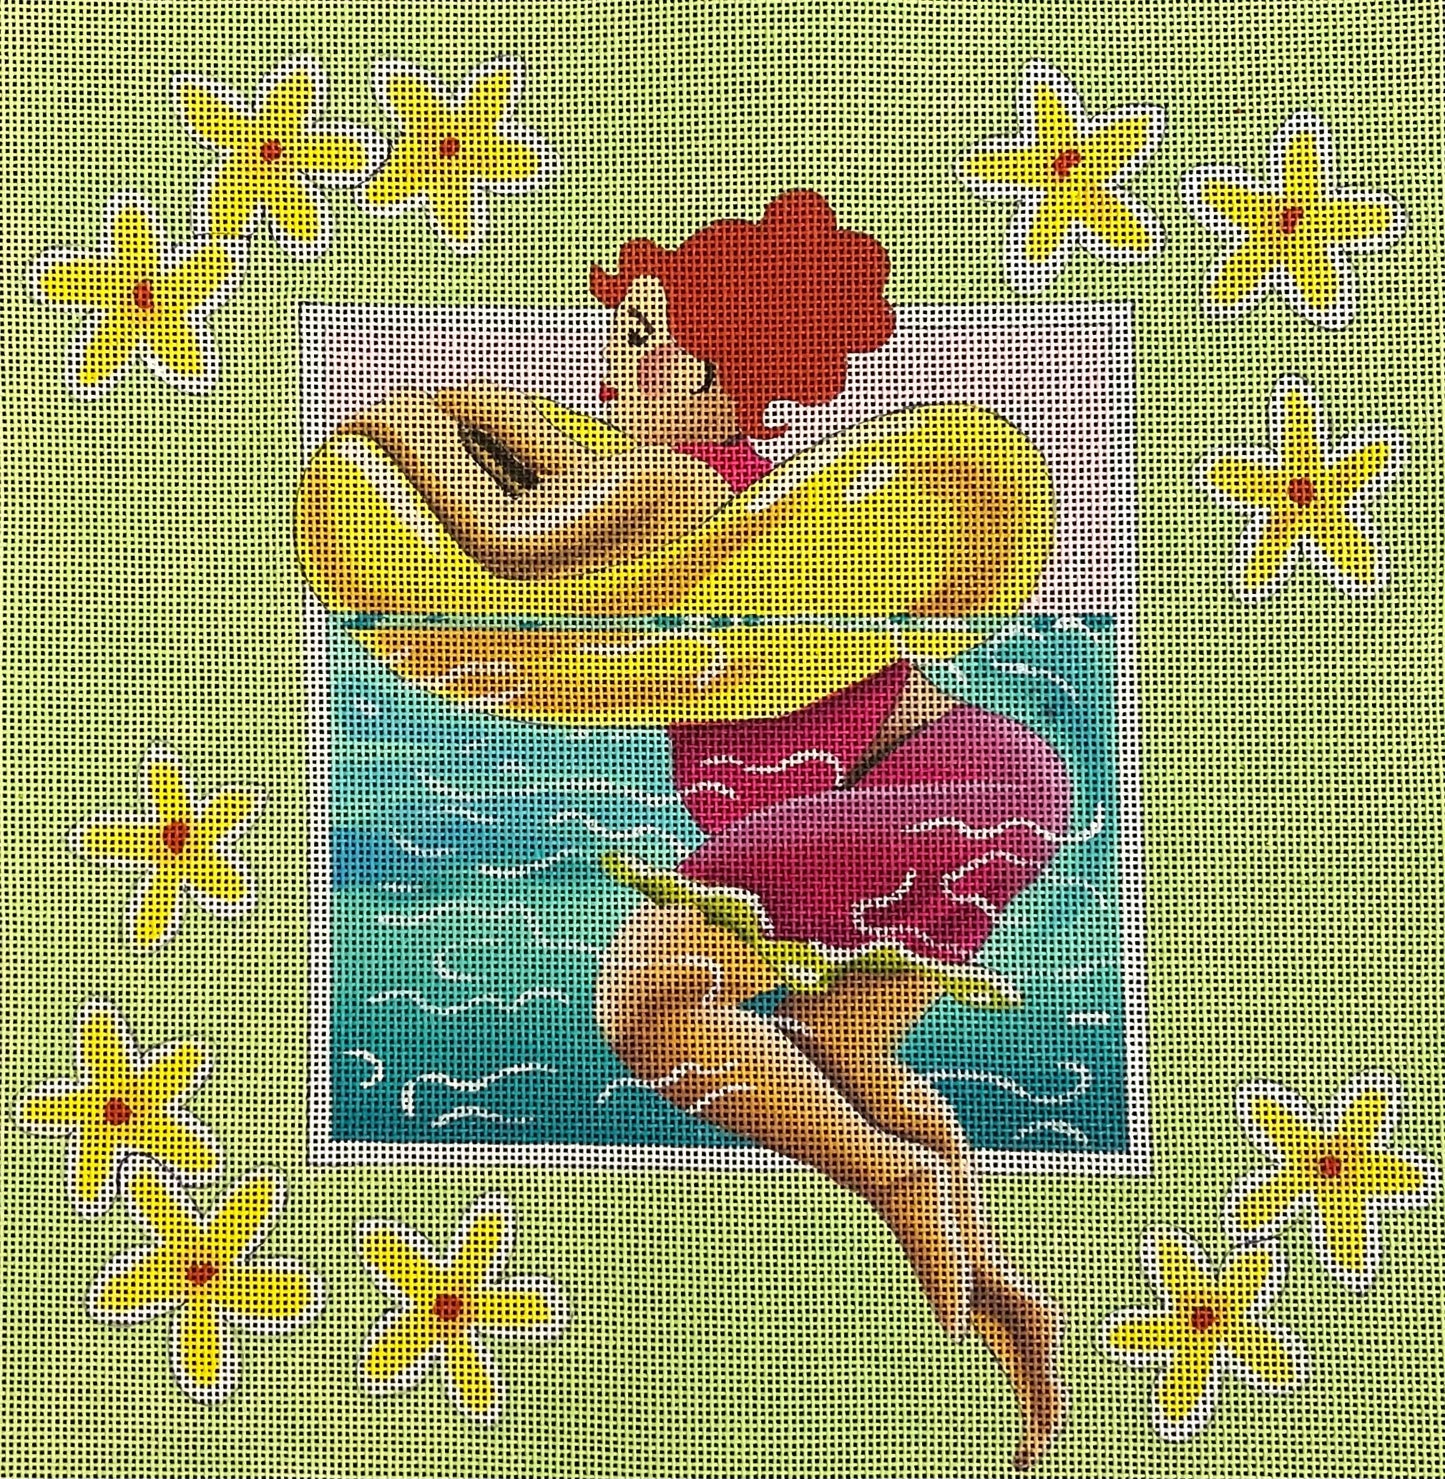 Redhead with Yellow Float